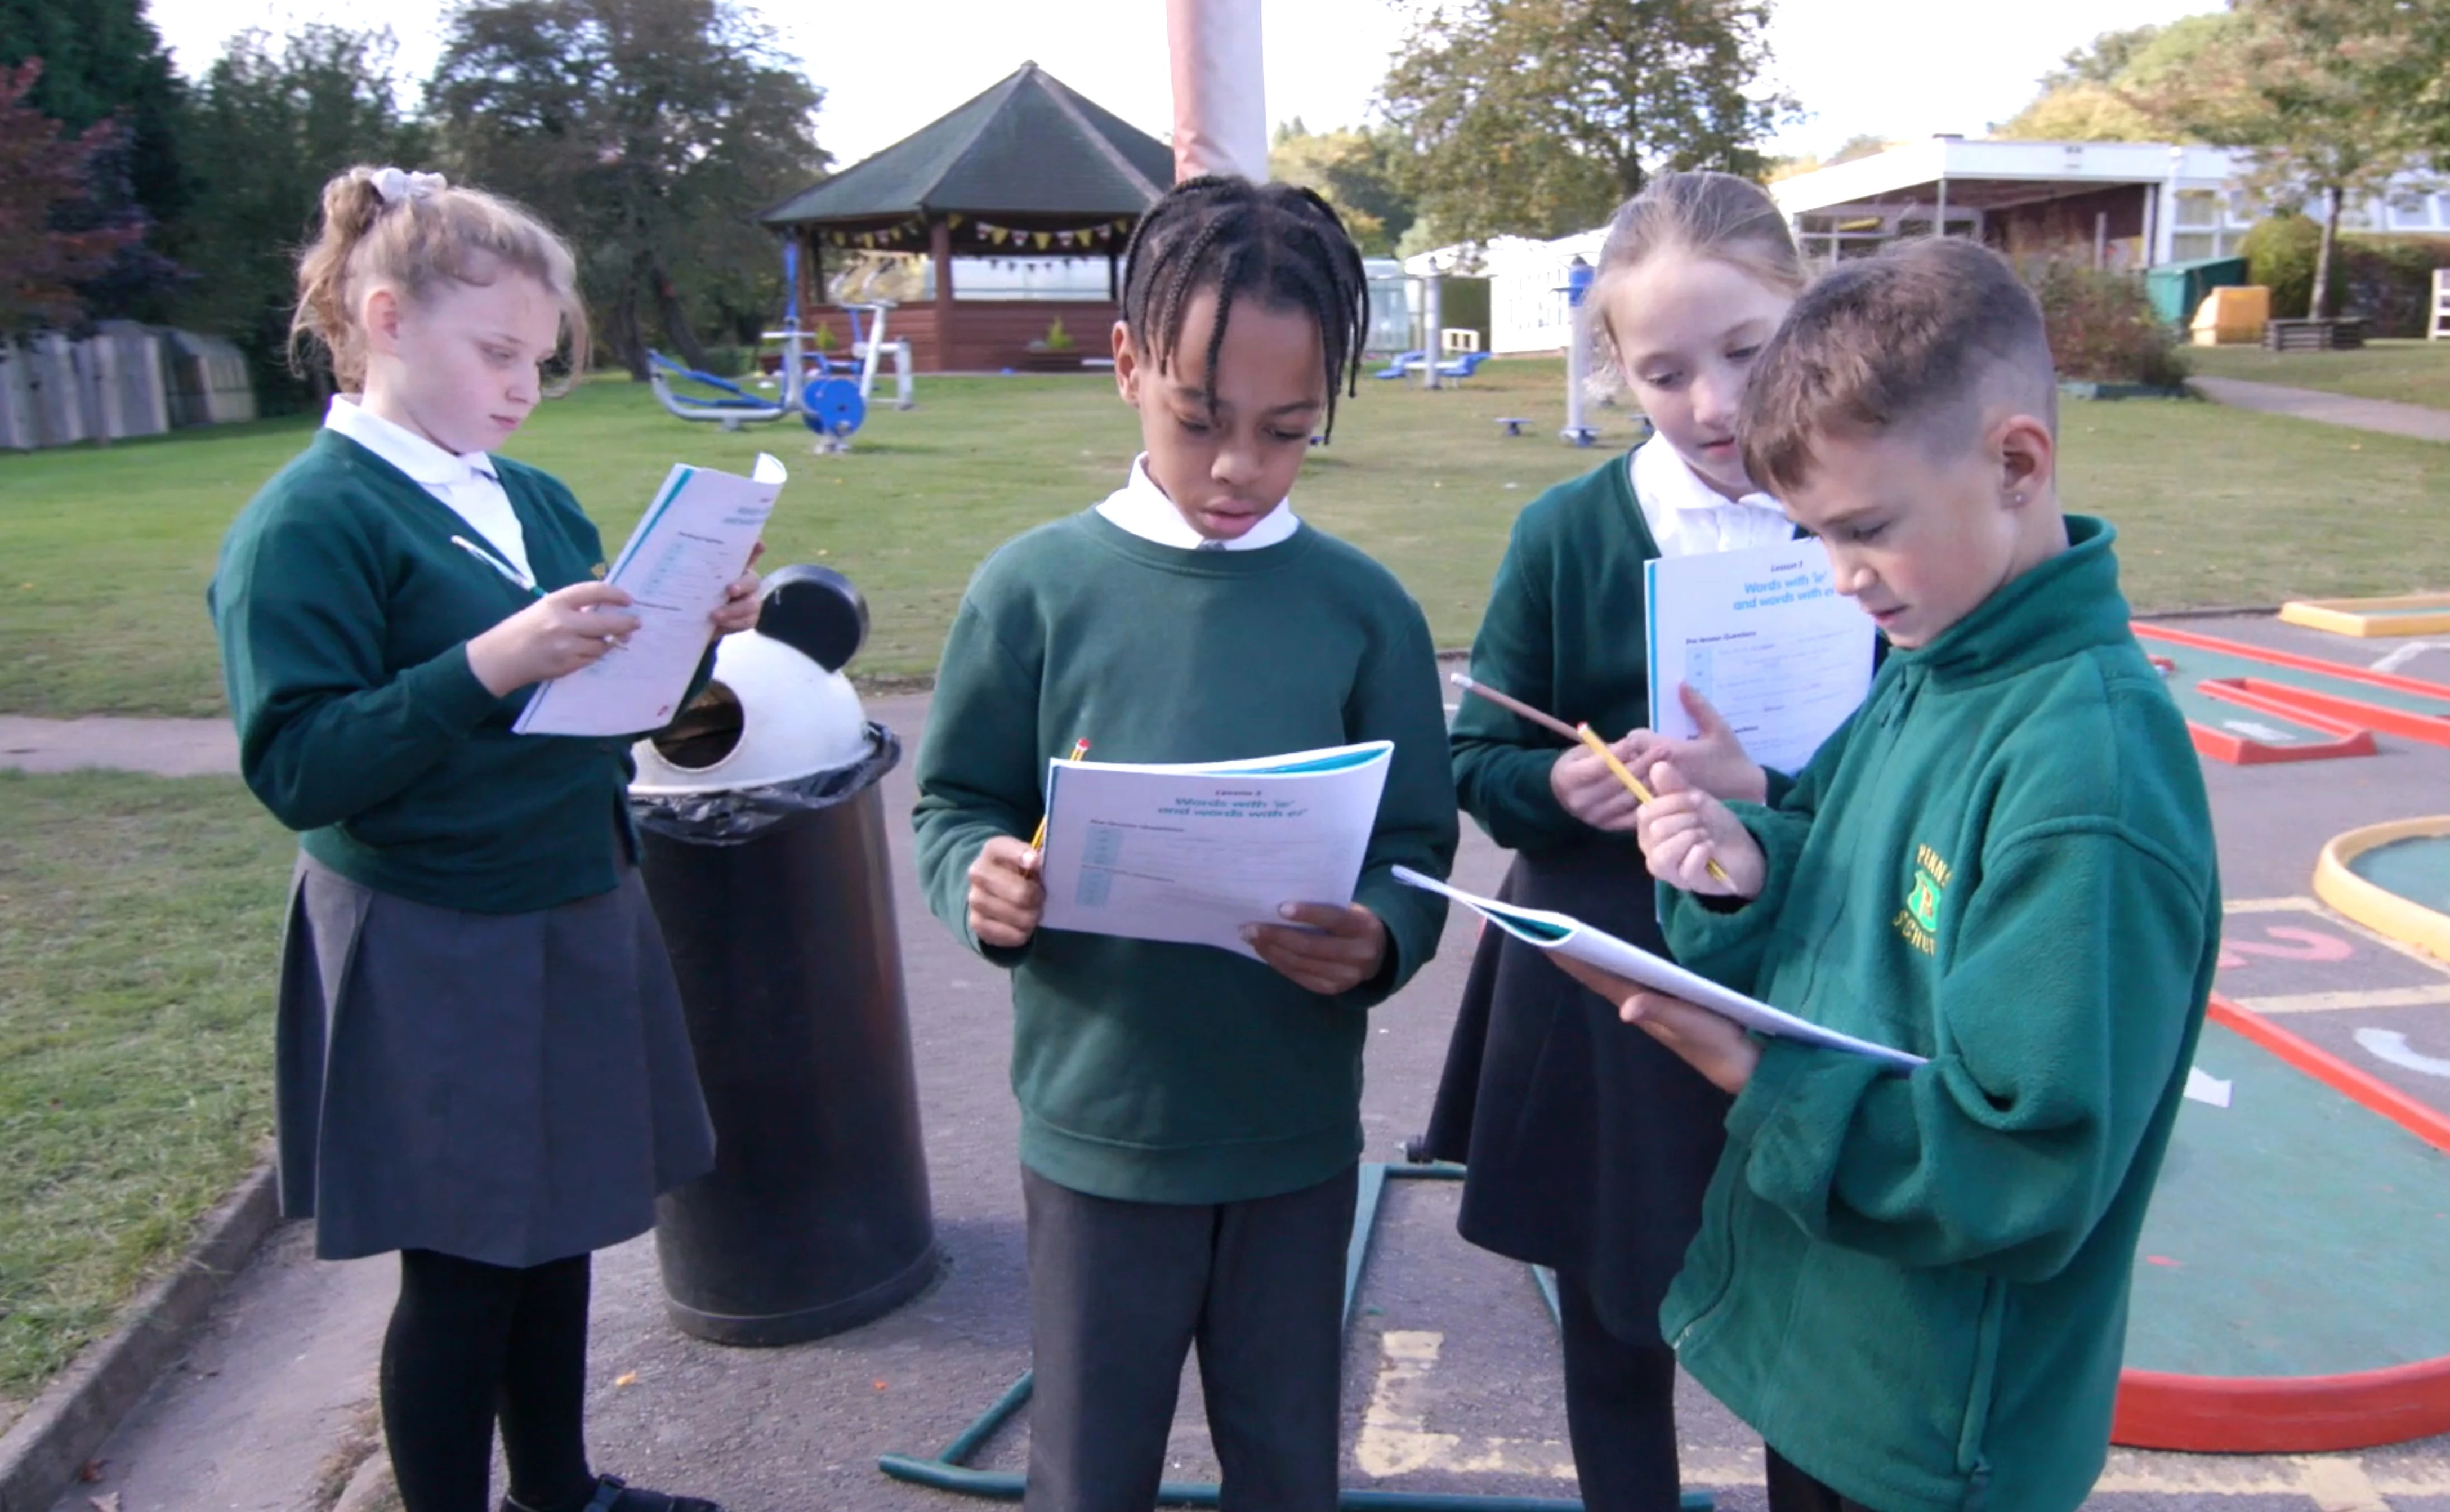 Pupils at Penns Hall Primary School in Sutton Coldfield complete English On The Move tasks outdoors